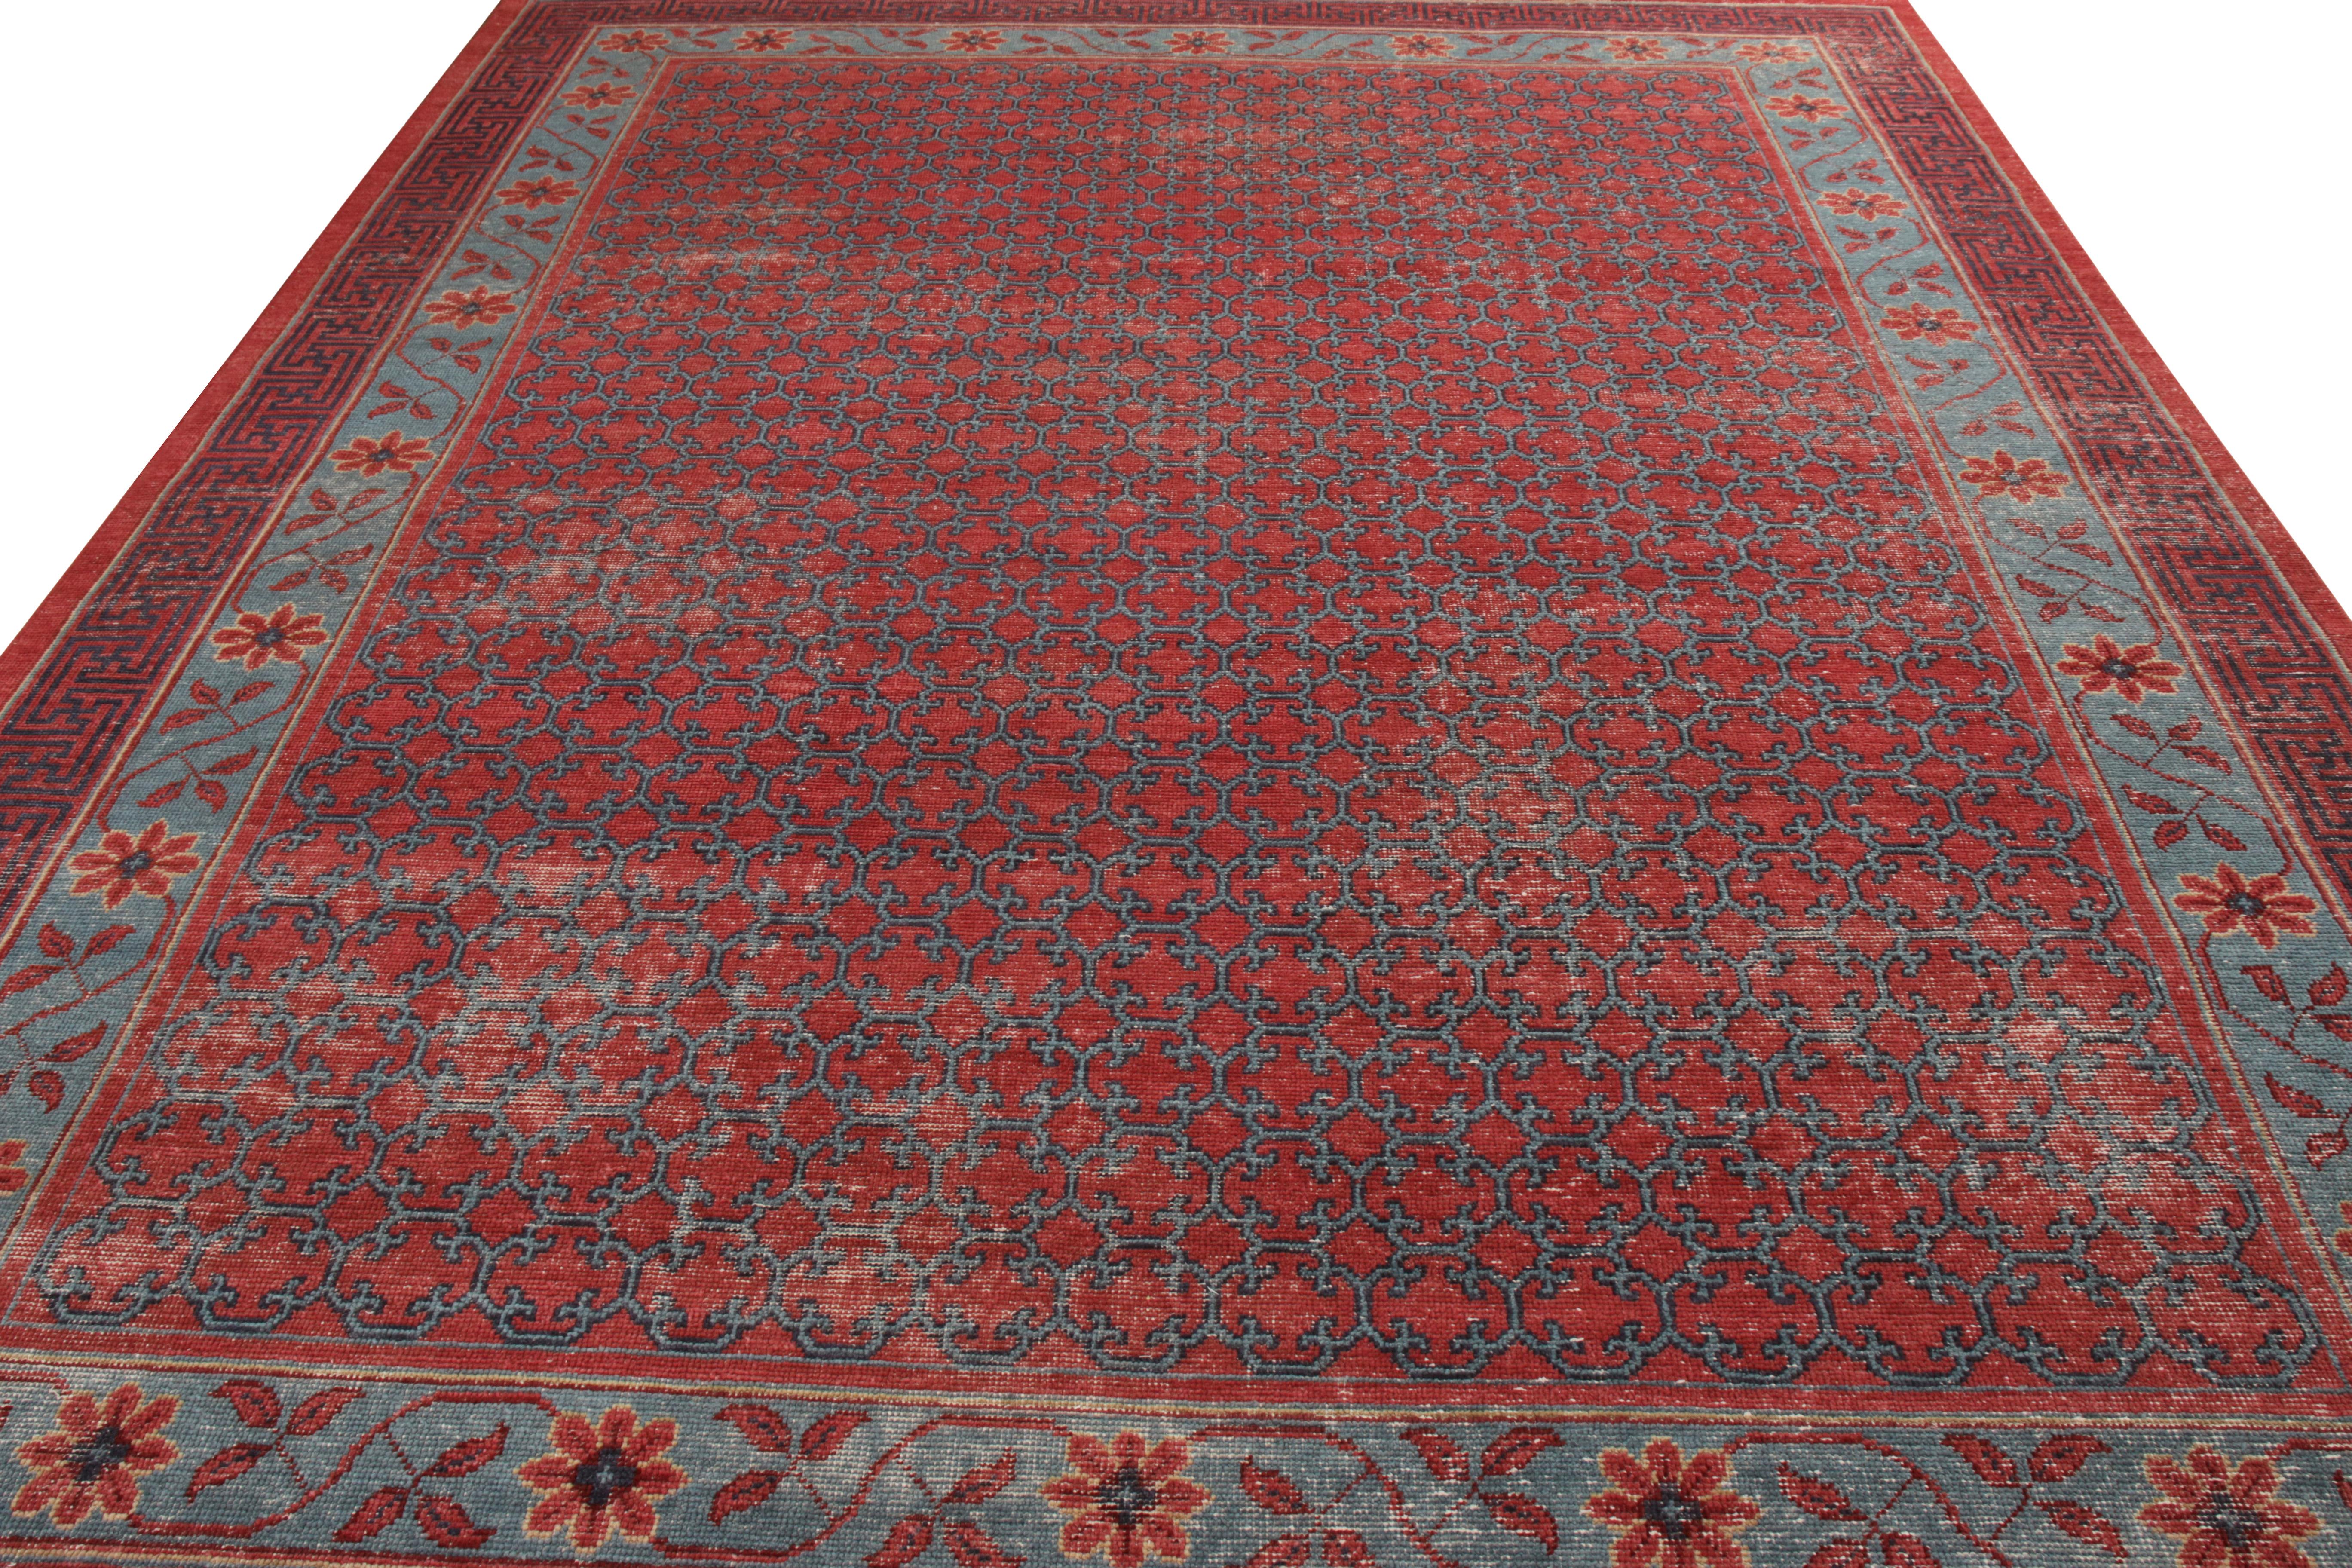 An custom distressed style rug design by Rug & Kilim from its Homage Collection—available in all colors and sizes. Hand knotted in wool, this Khotan rug style carries a trellis pattern encased in a floral border scaling in a lucious velvet red and